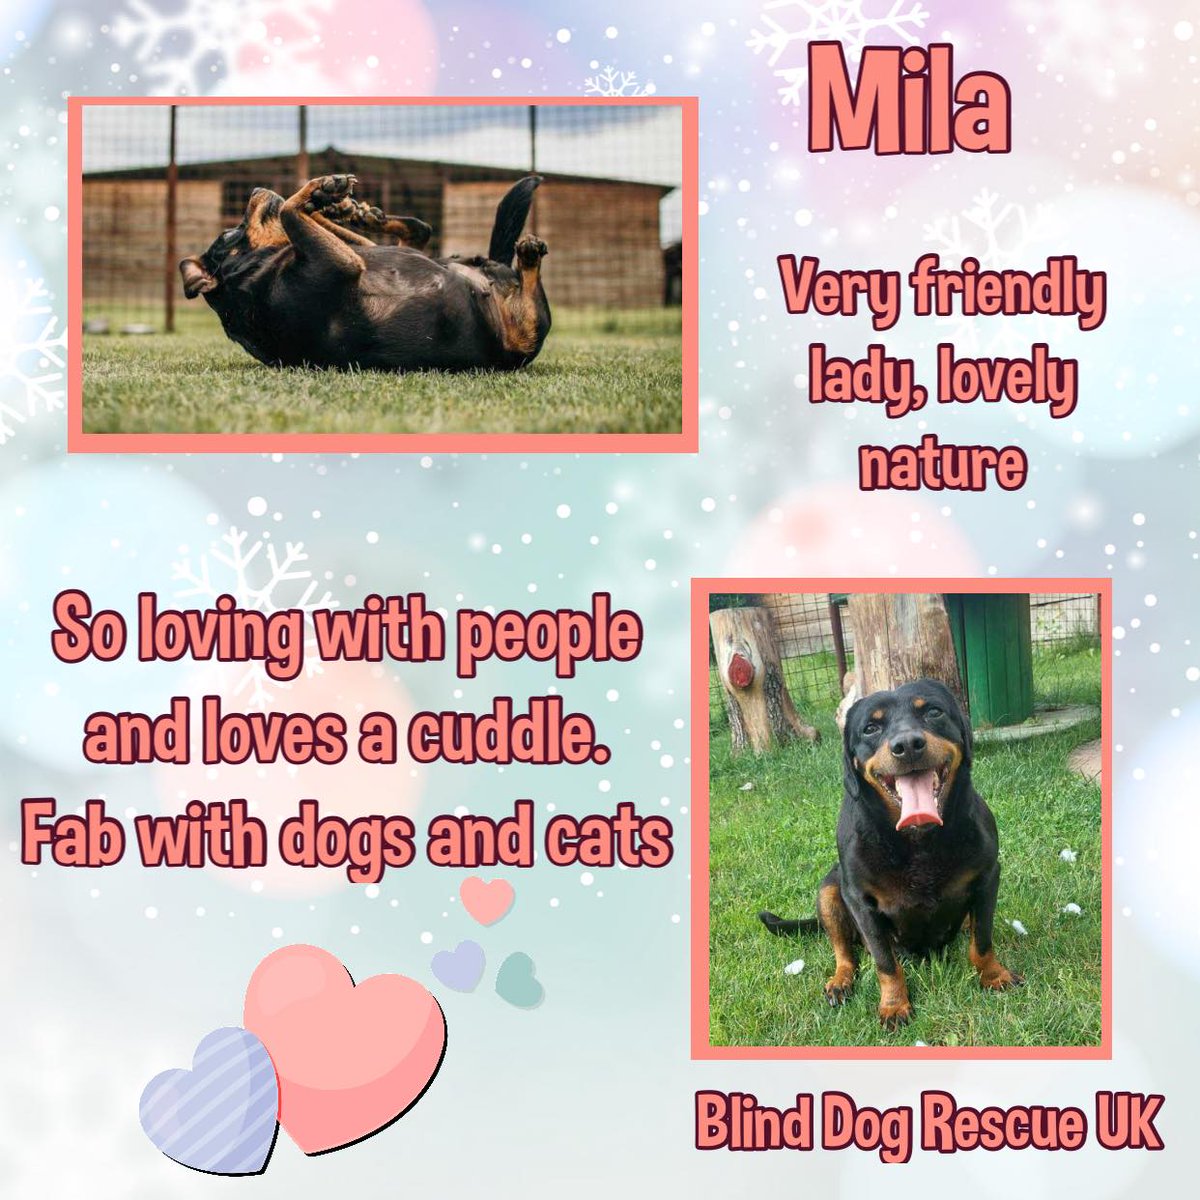 #k9hour 6yo RottweilerX MILA used to have an owner but he died & his family took her to the Shelter. She is a blind lady, described as very friendly with both dogs & cats, & has a lovely nature. She will need a patient adopter who will give her time to settle in new surroundings,